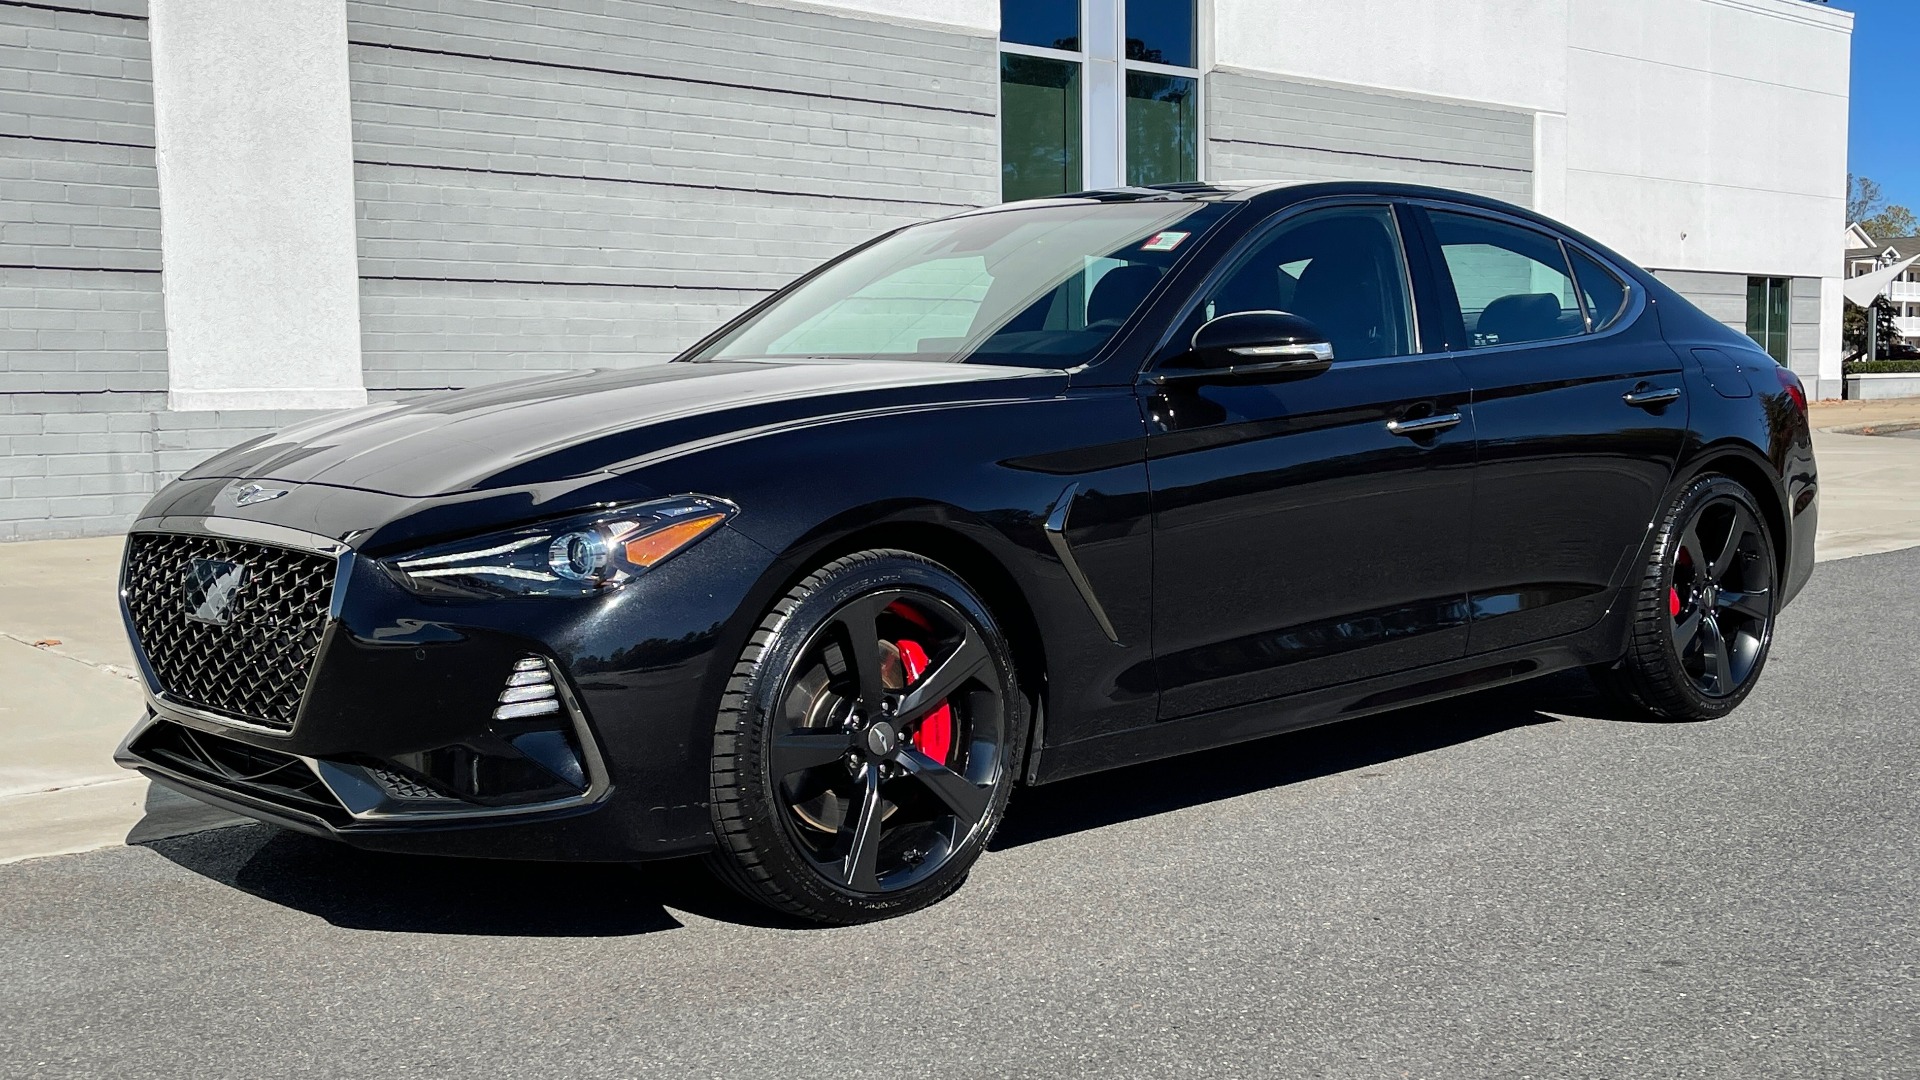 Used 2019 Genesis G70 3.3T ADVANCED RWD / NAV / HUD / PARK ASST / SUNROOF / SURROUND VIEW for sale Sold at Formula Imports in Charlotte NC 28227 2